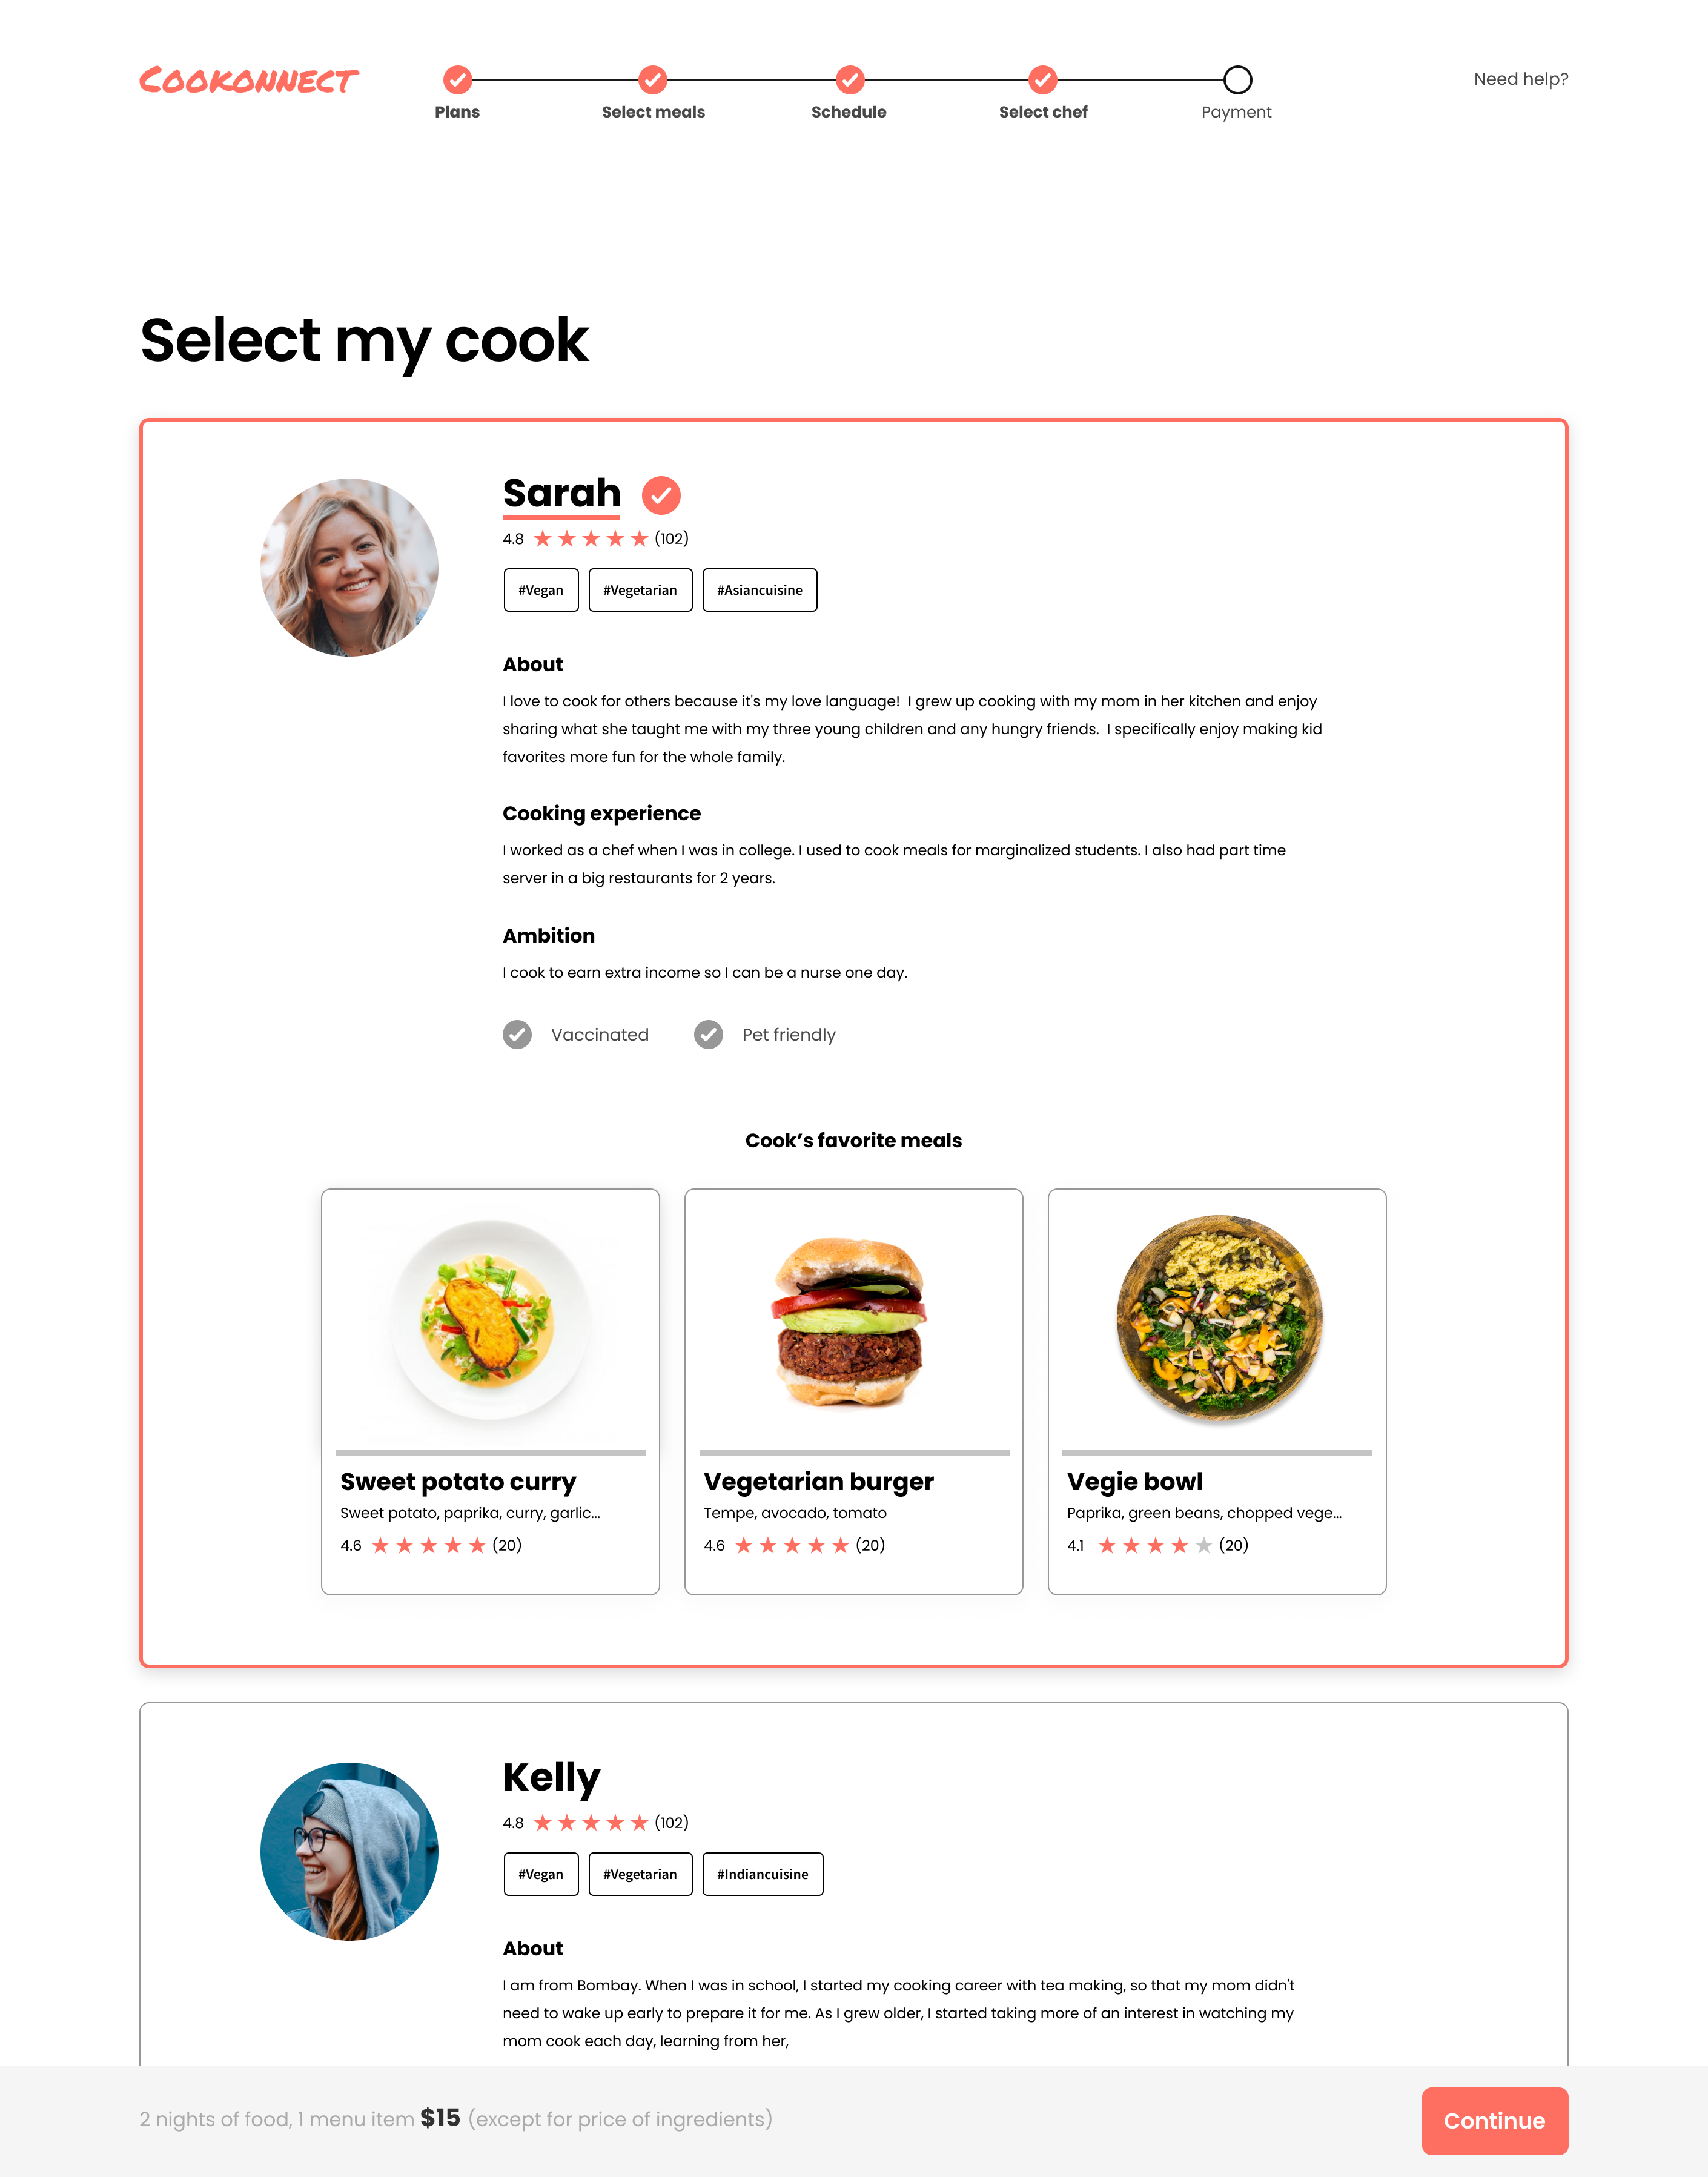 Select cook